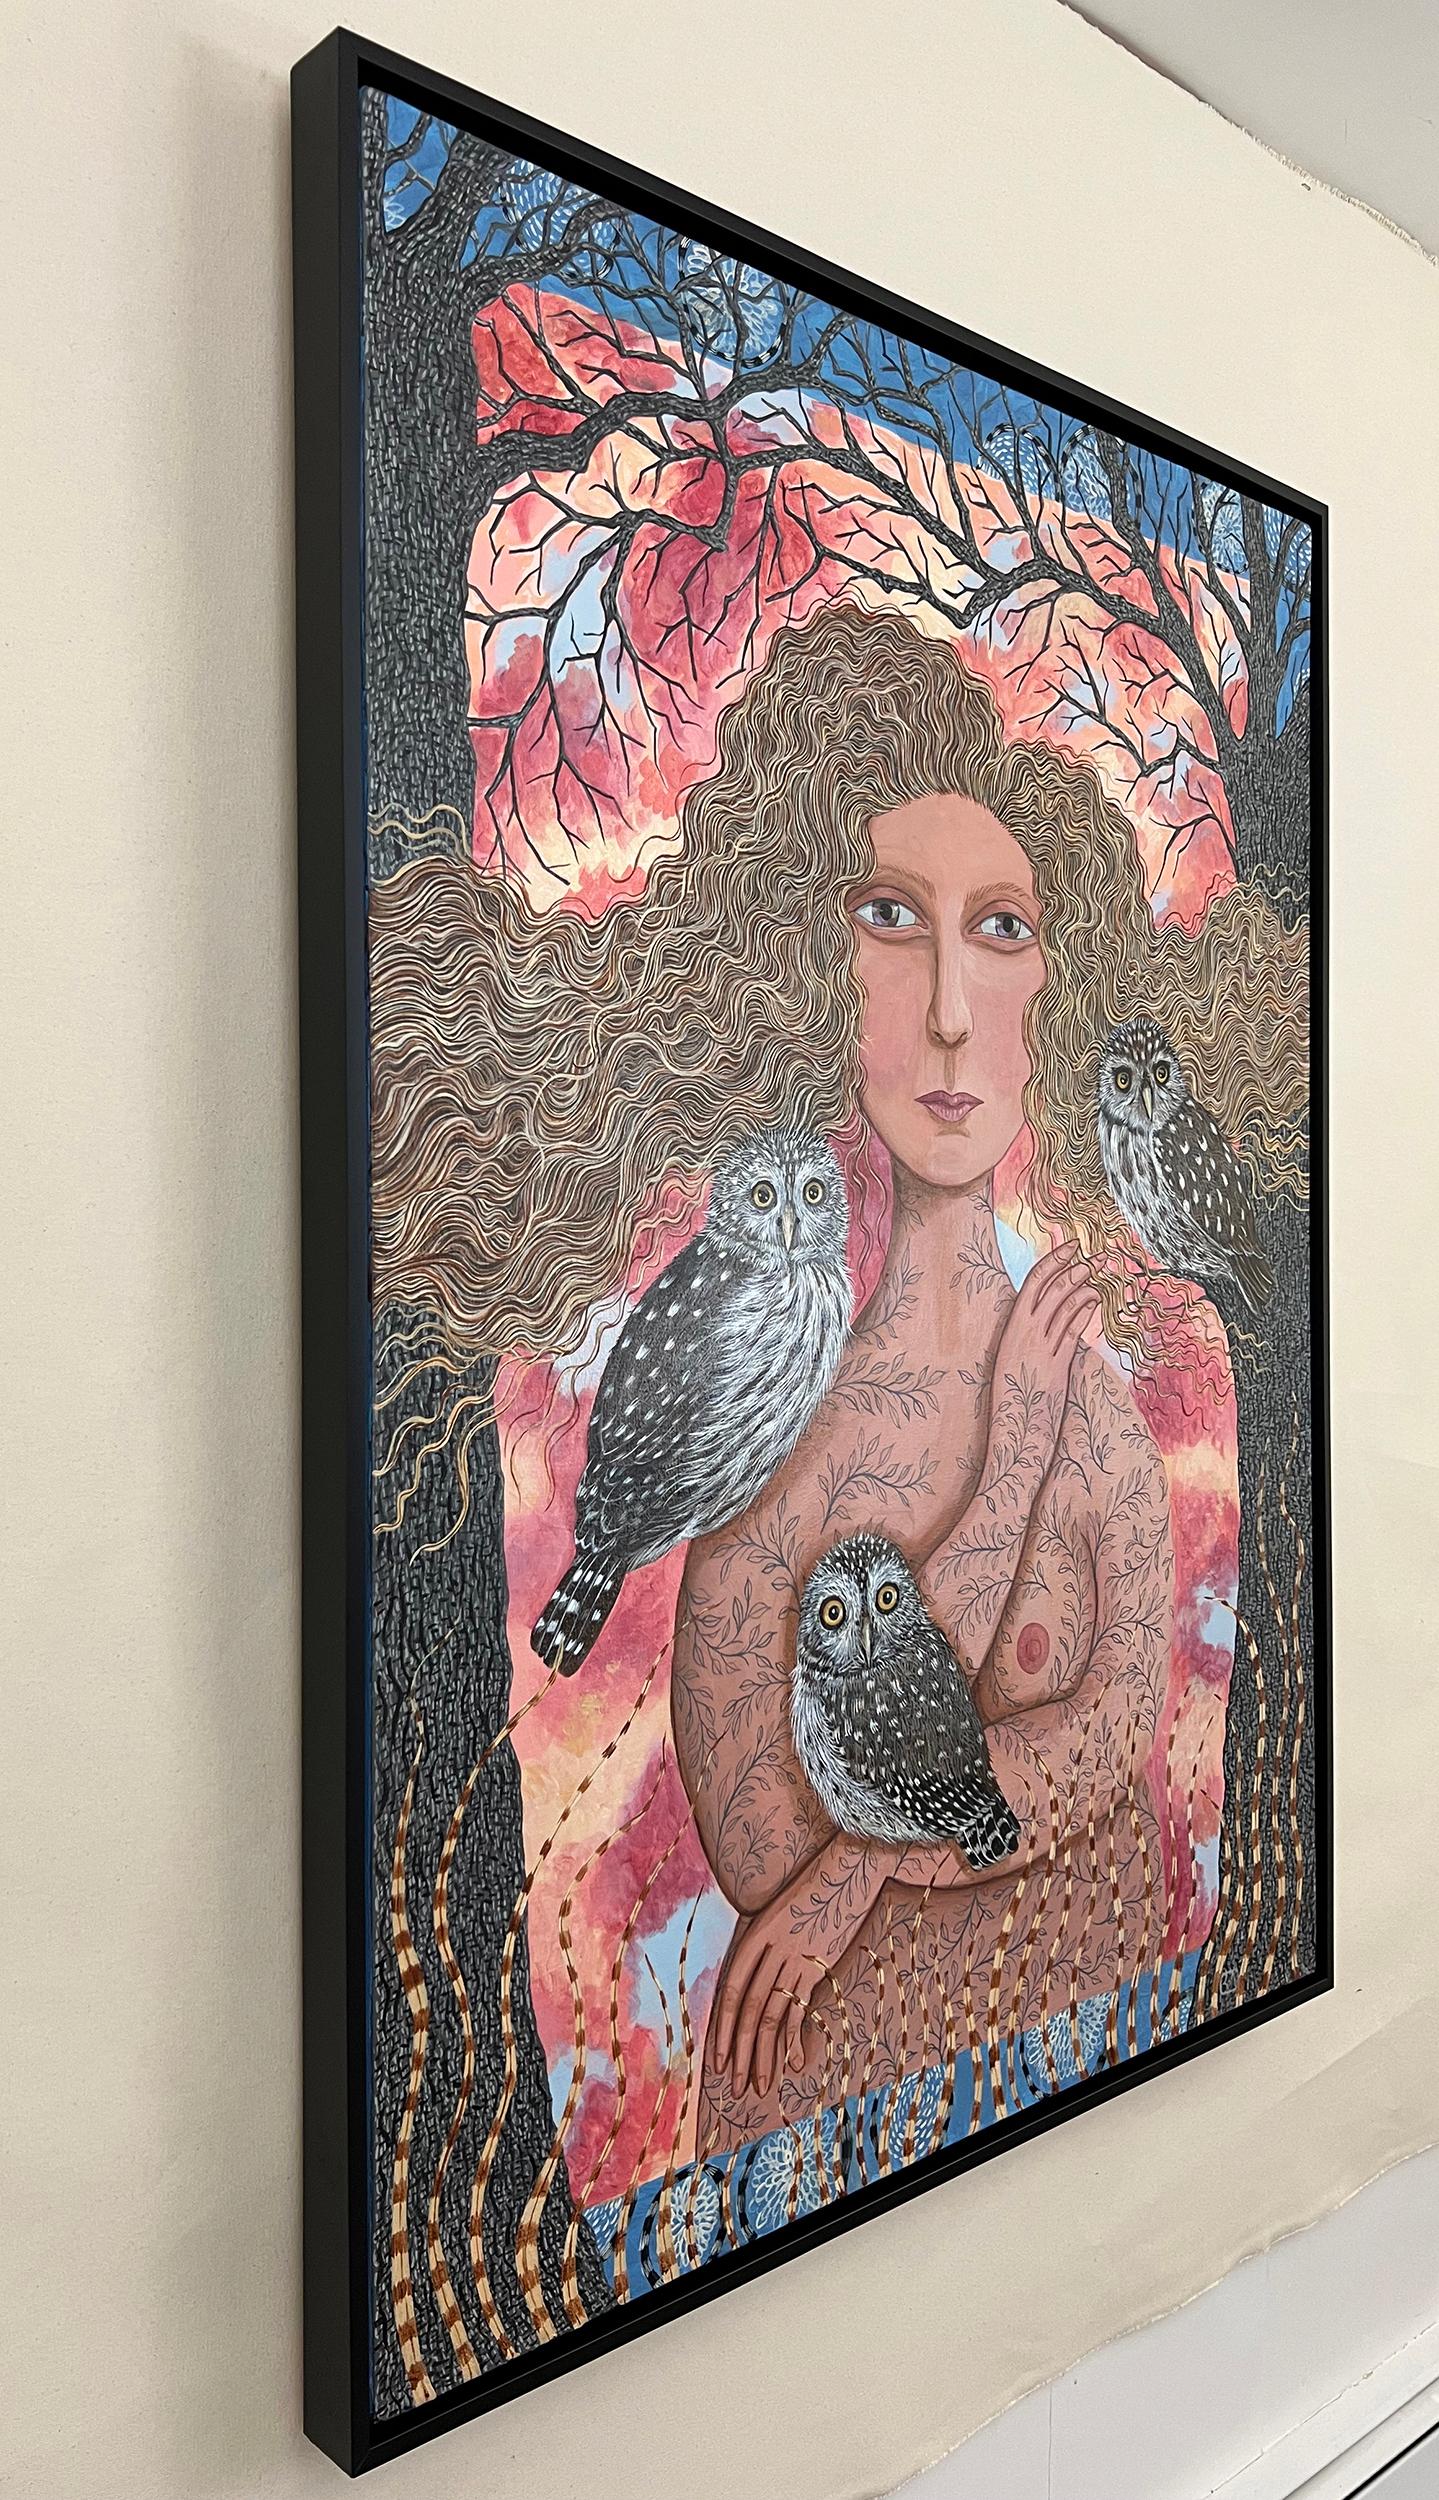 <p>Artist Comments<br>Artist Johansen Newman illustrates a nude portrait of a woman in the deep woods. She uses her unique combination of colors, patterns, and details, presenting a tattooed woman with flowing hair basking in the brilliant sunset